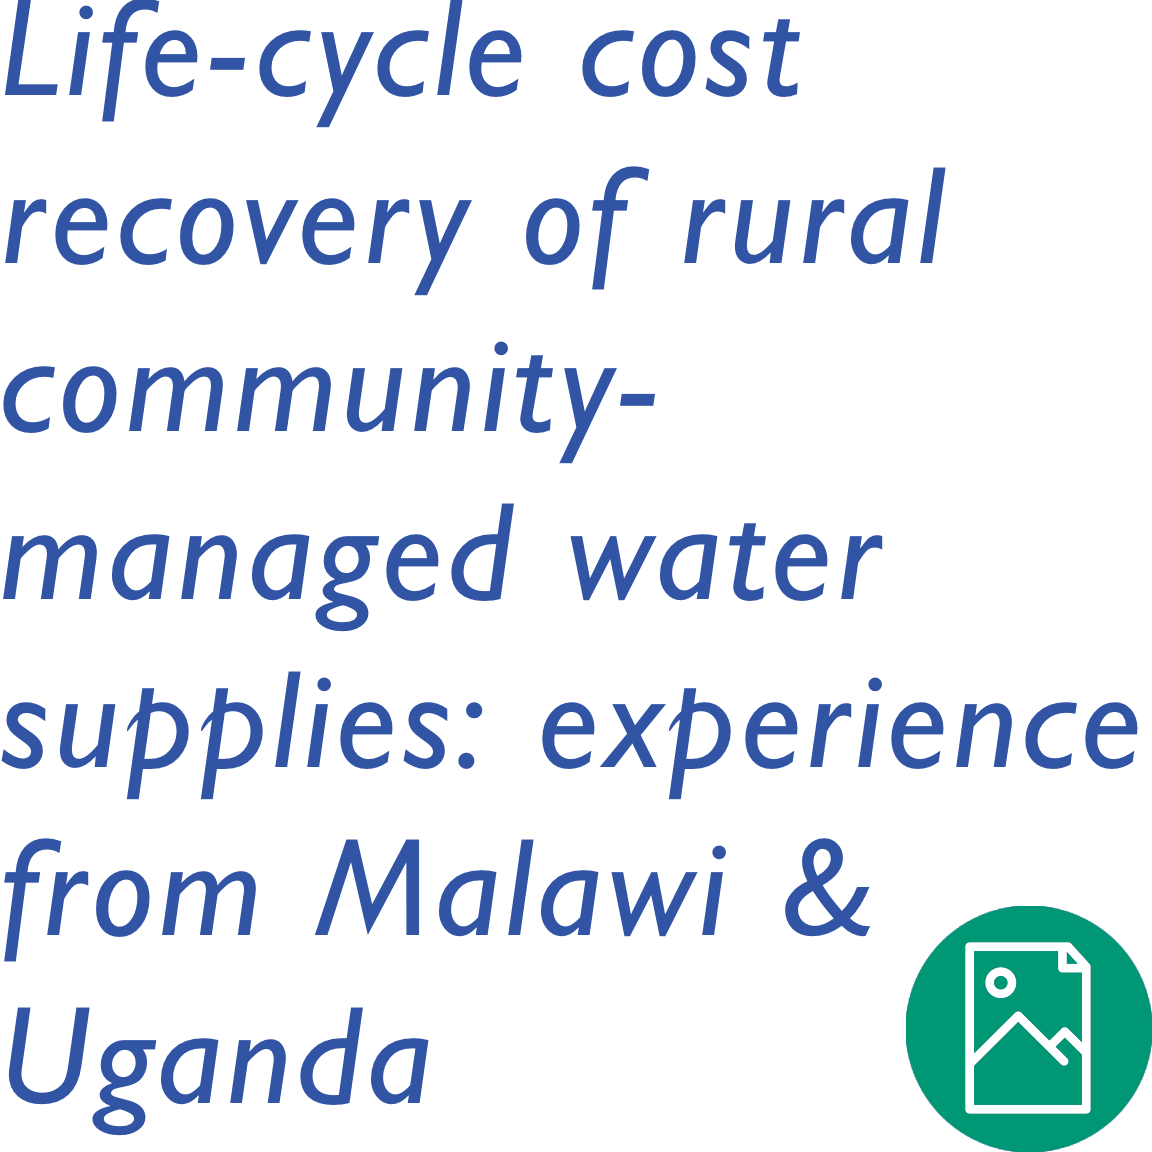 Life-Cycle Cost Recovery of Rural Community-managed Water Supplies: Experience from Malawi and Uganda